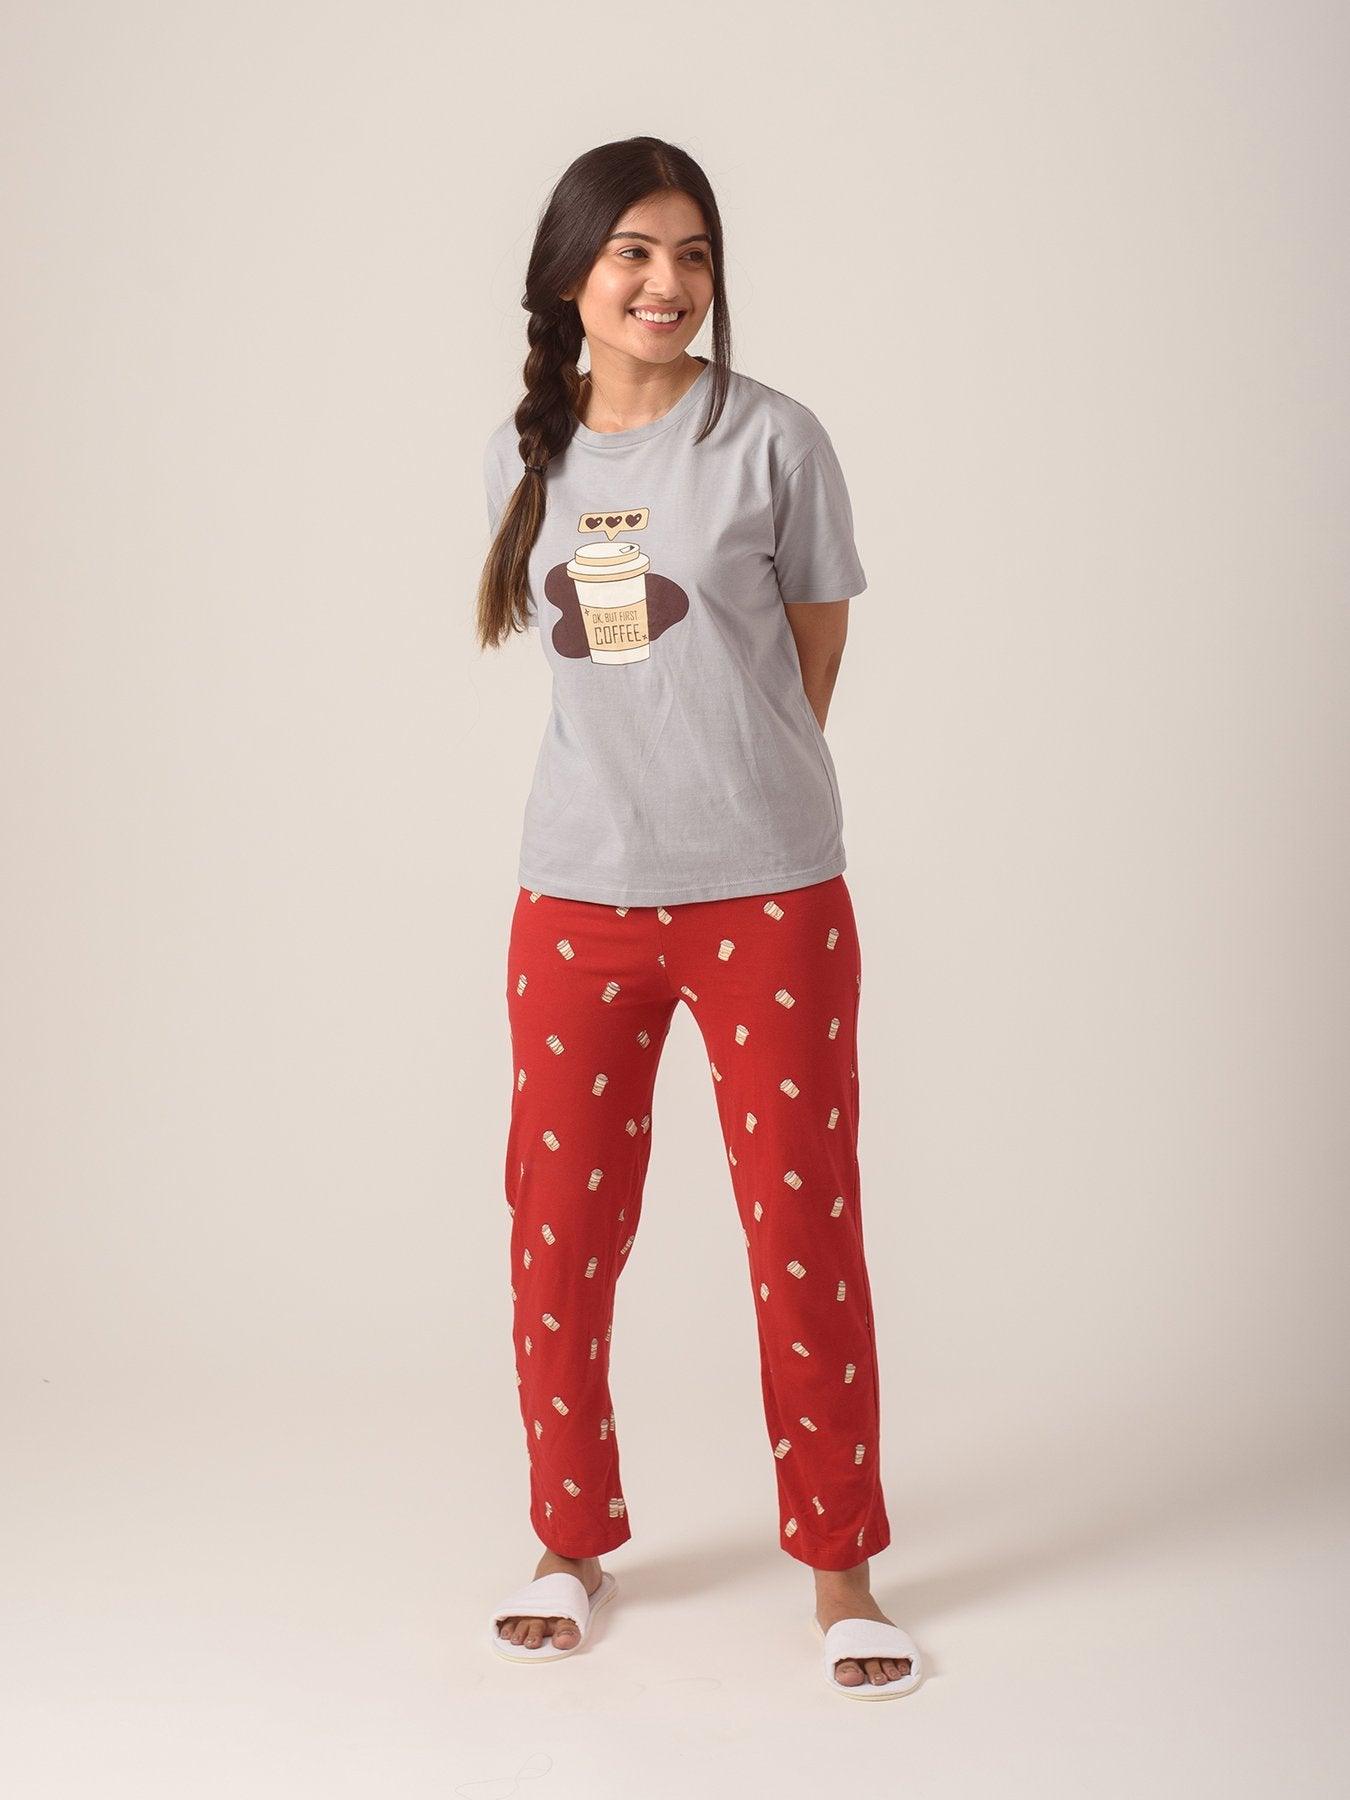 Loungewear- The New Go-to Outfit For Work From Home? - soxytoes